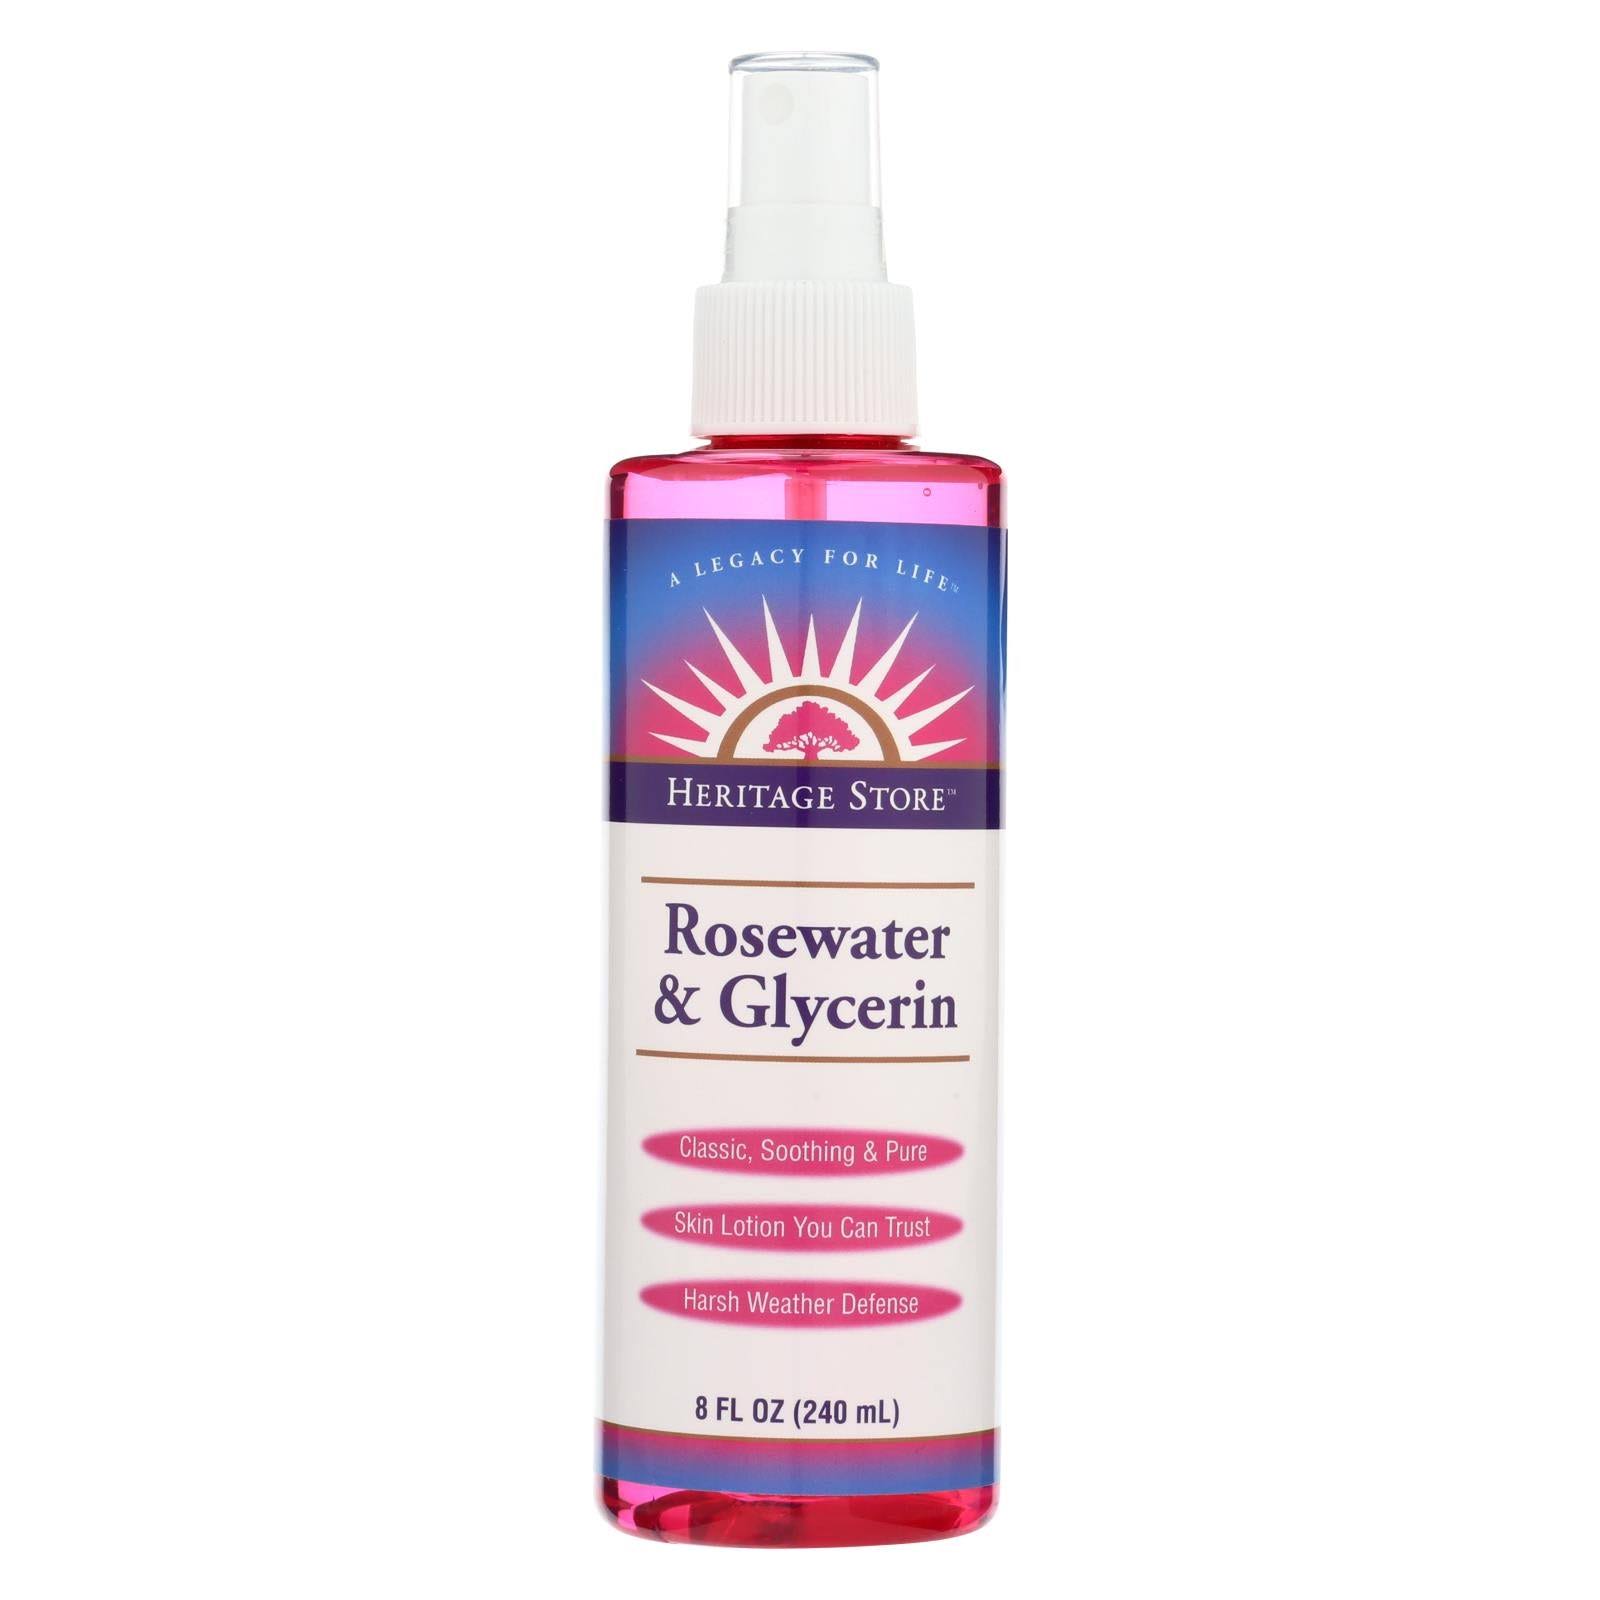 Heritage Store Rosewater & Glycerin - 240ml